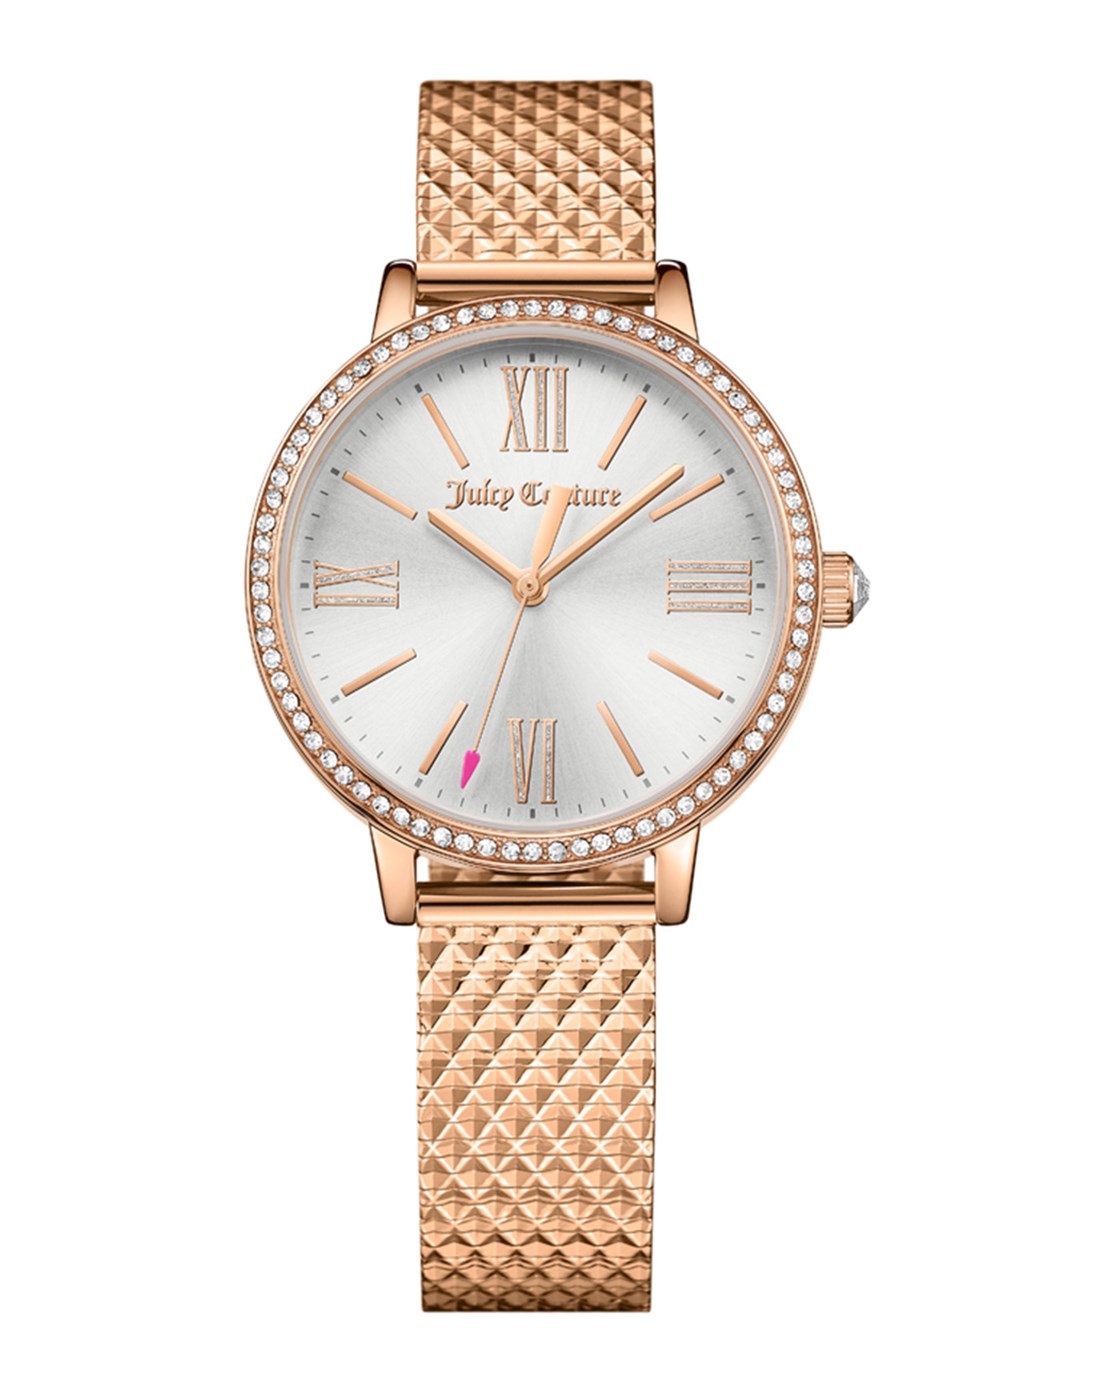 Juicy Couture Rose Gold Socialite Watch